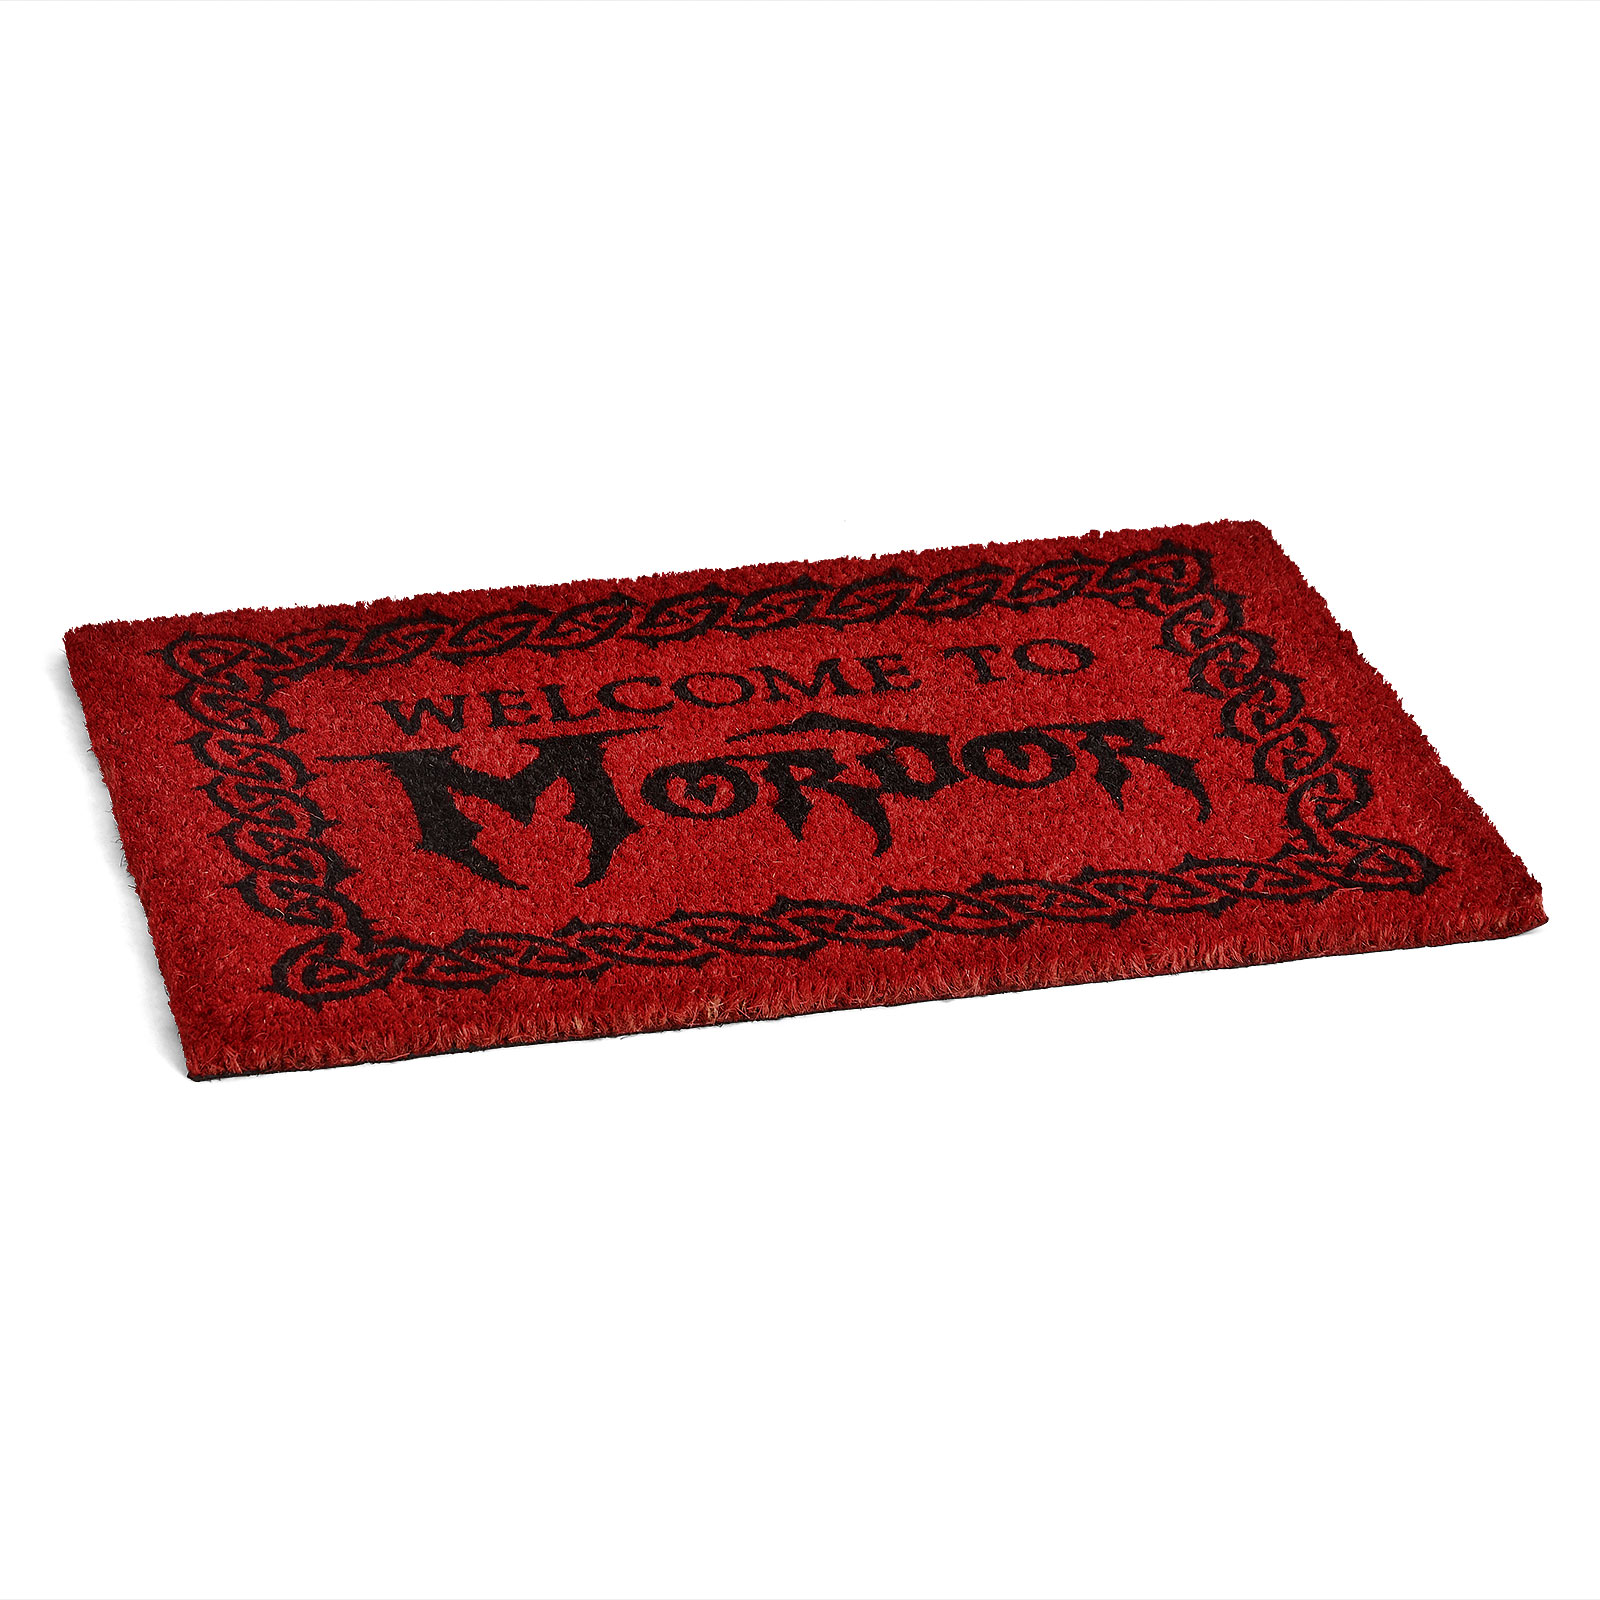 Lord of the Rings - Welcome to Mordor Doormat